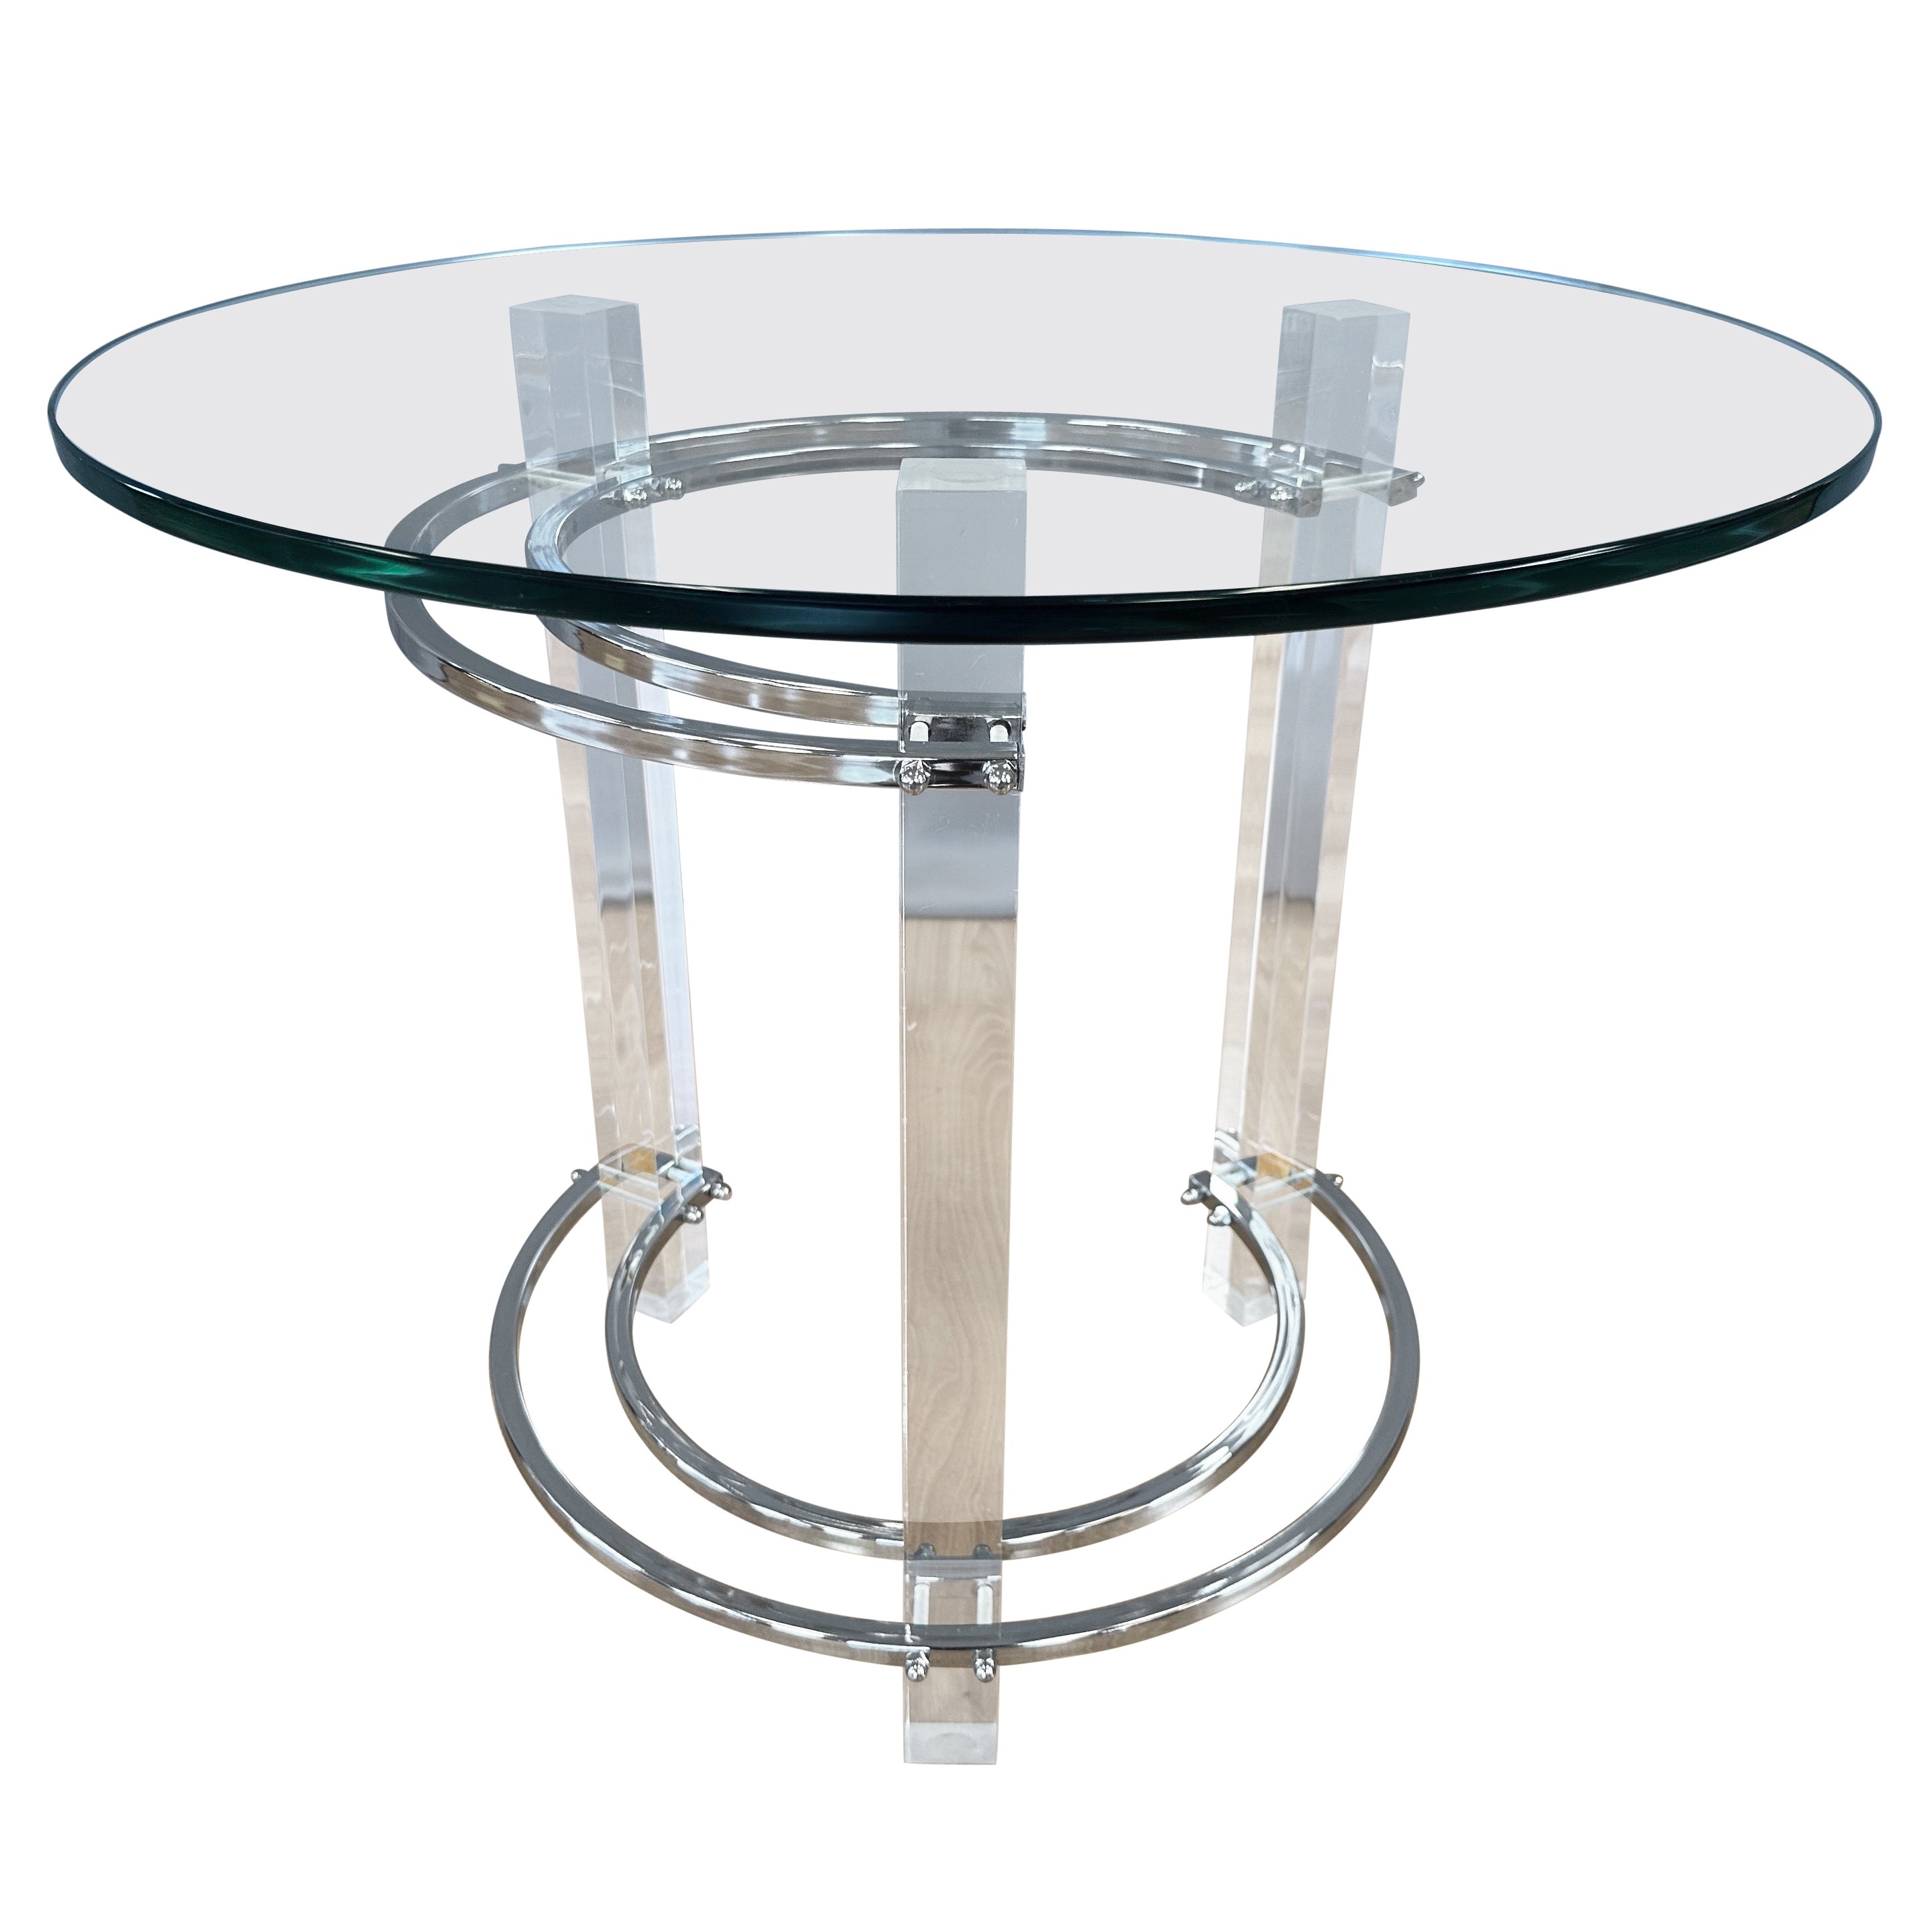 Charles Hollis Jones Lucite and Chrome Circular Side Table or End Table, 1970s For Sale